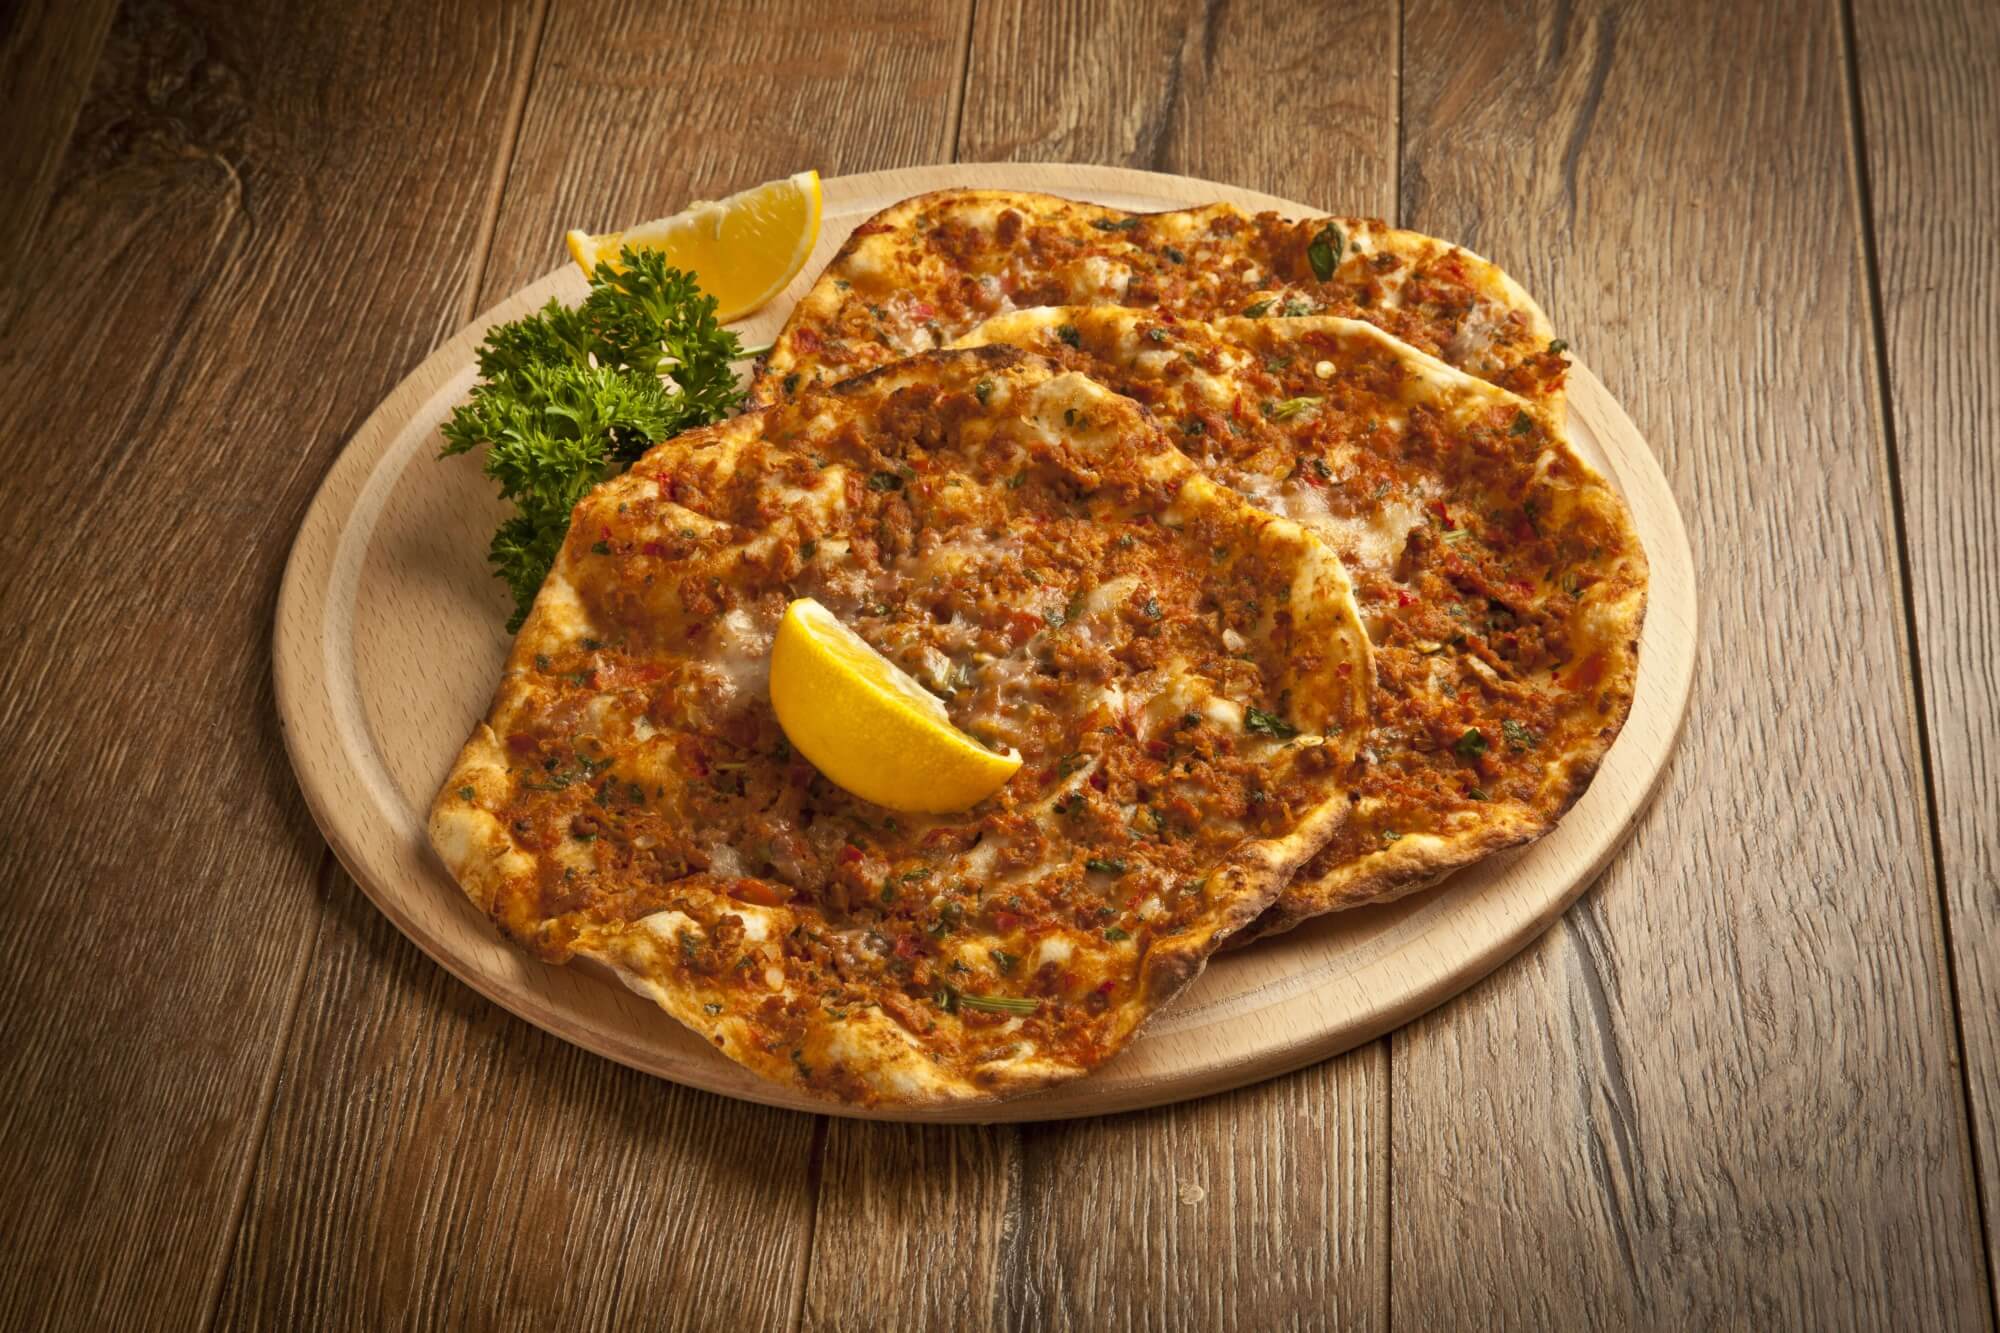 Lahmacun also known as Turkish pizza